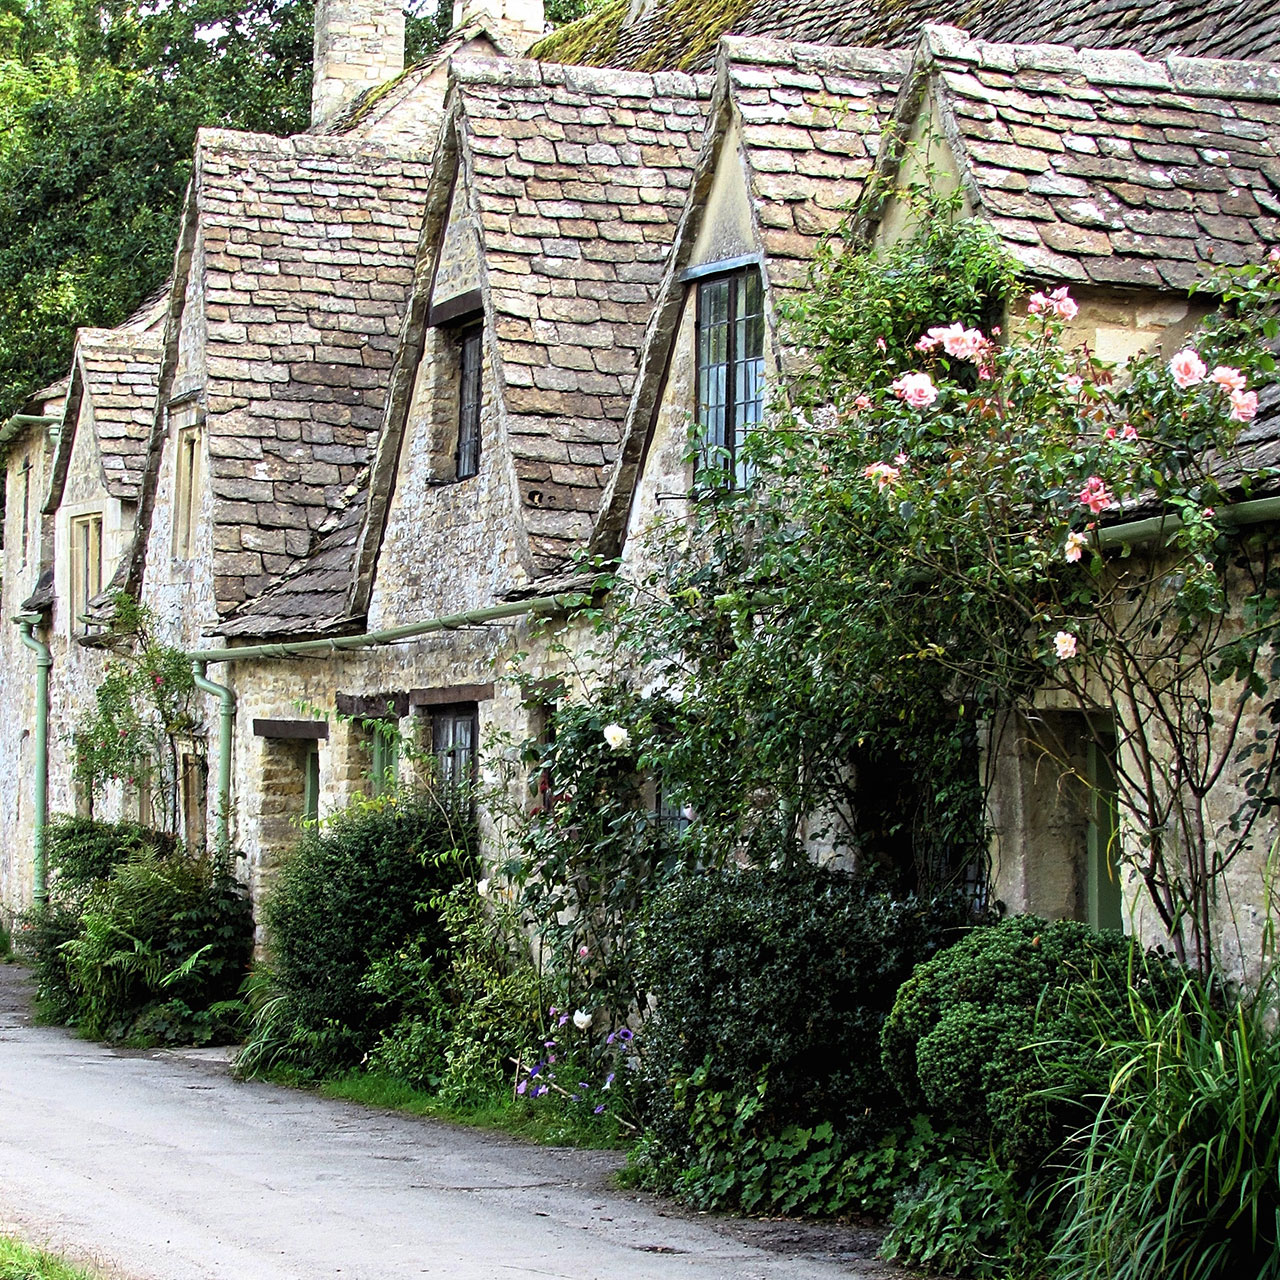 Exterior of attractive terraced cottages in an unnamed, quintessential Cotswold village